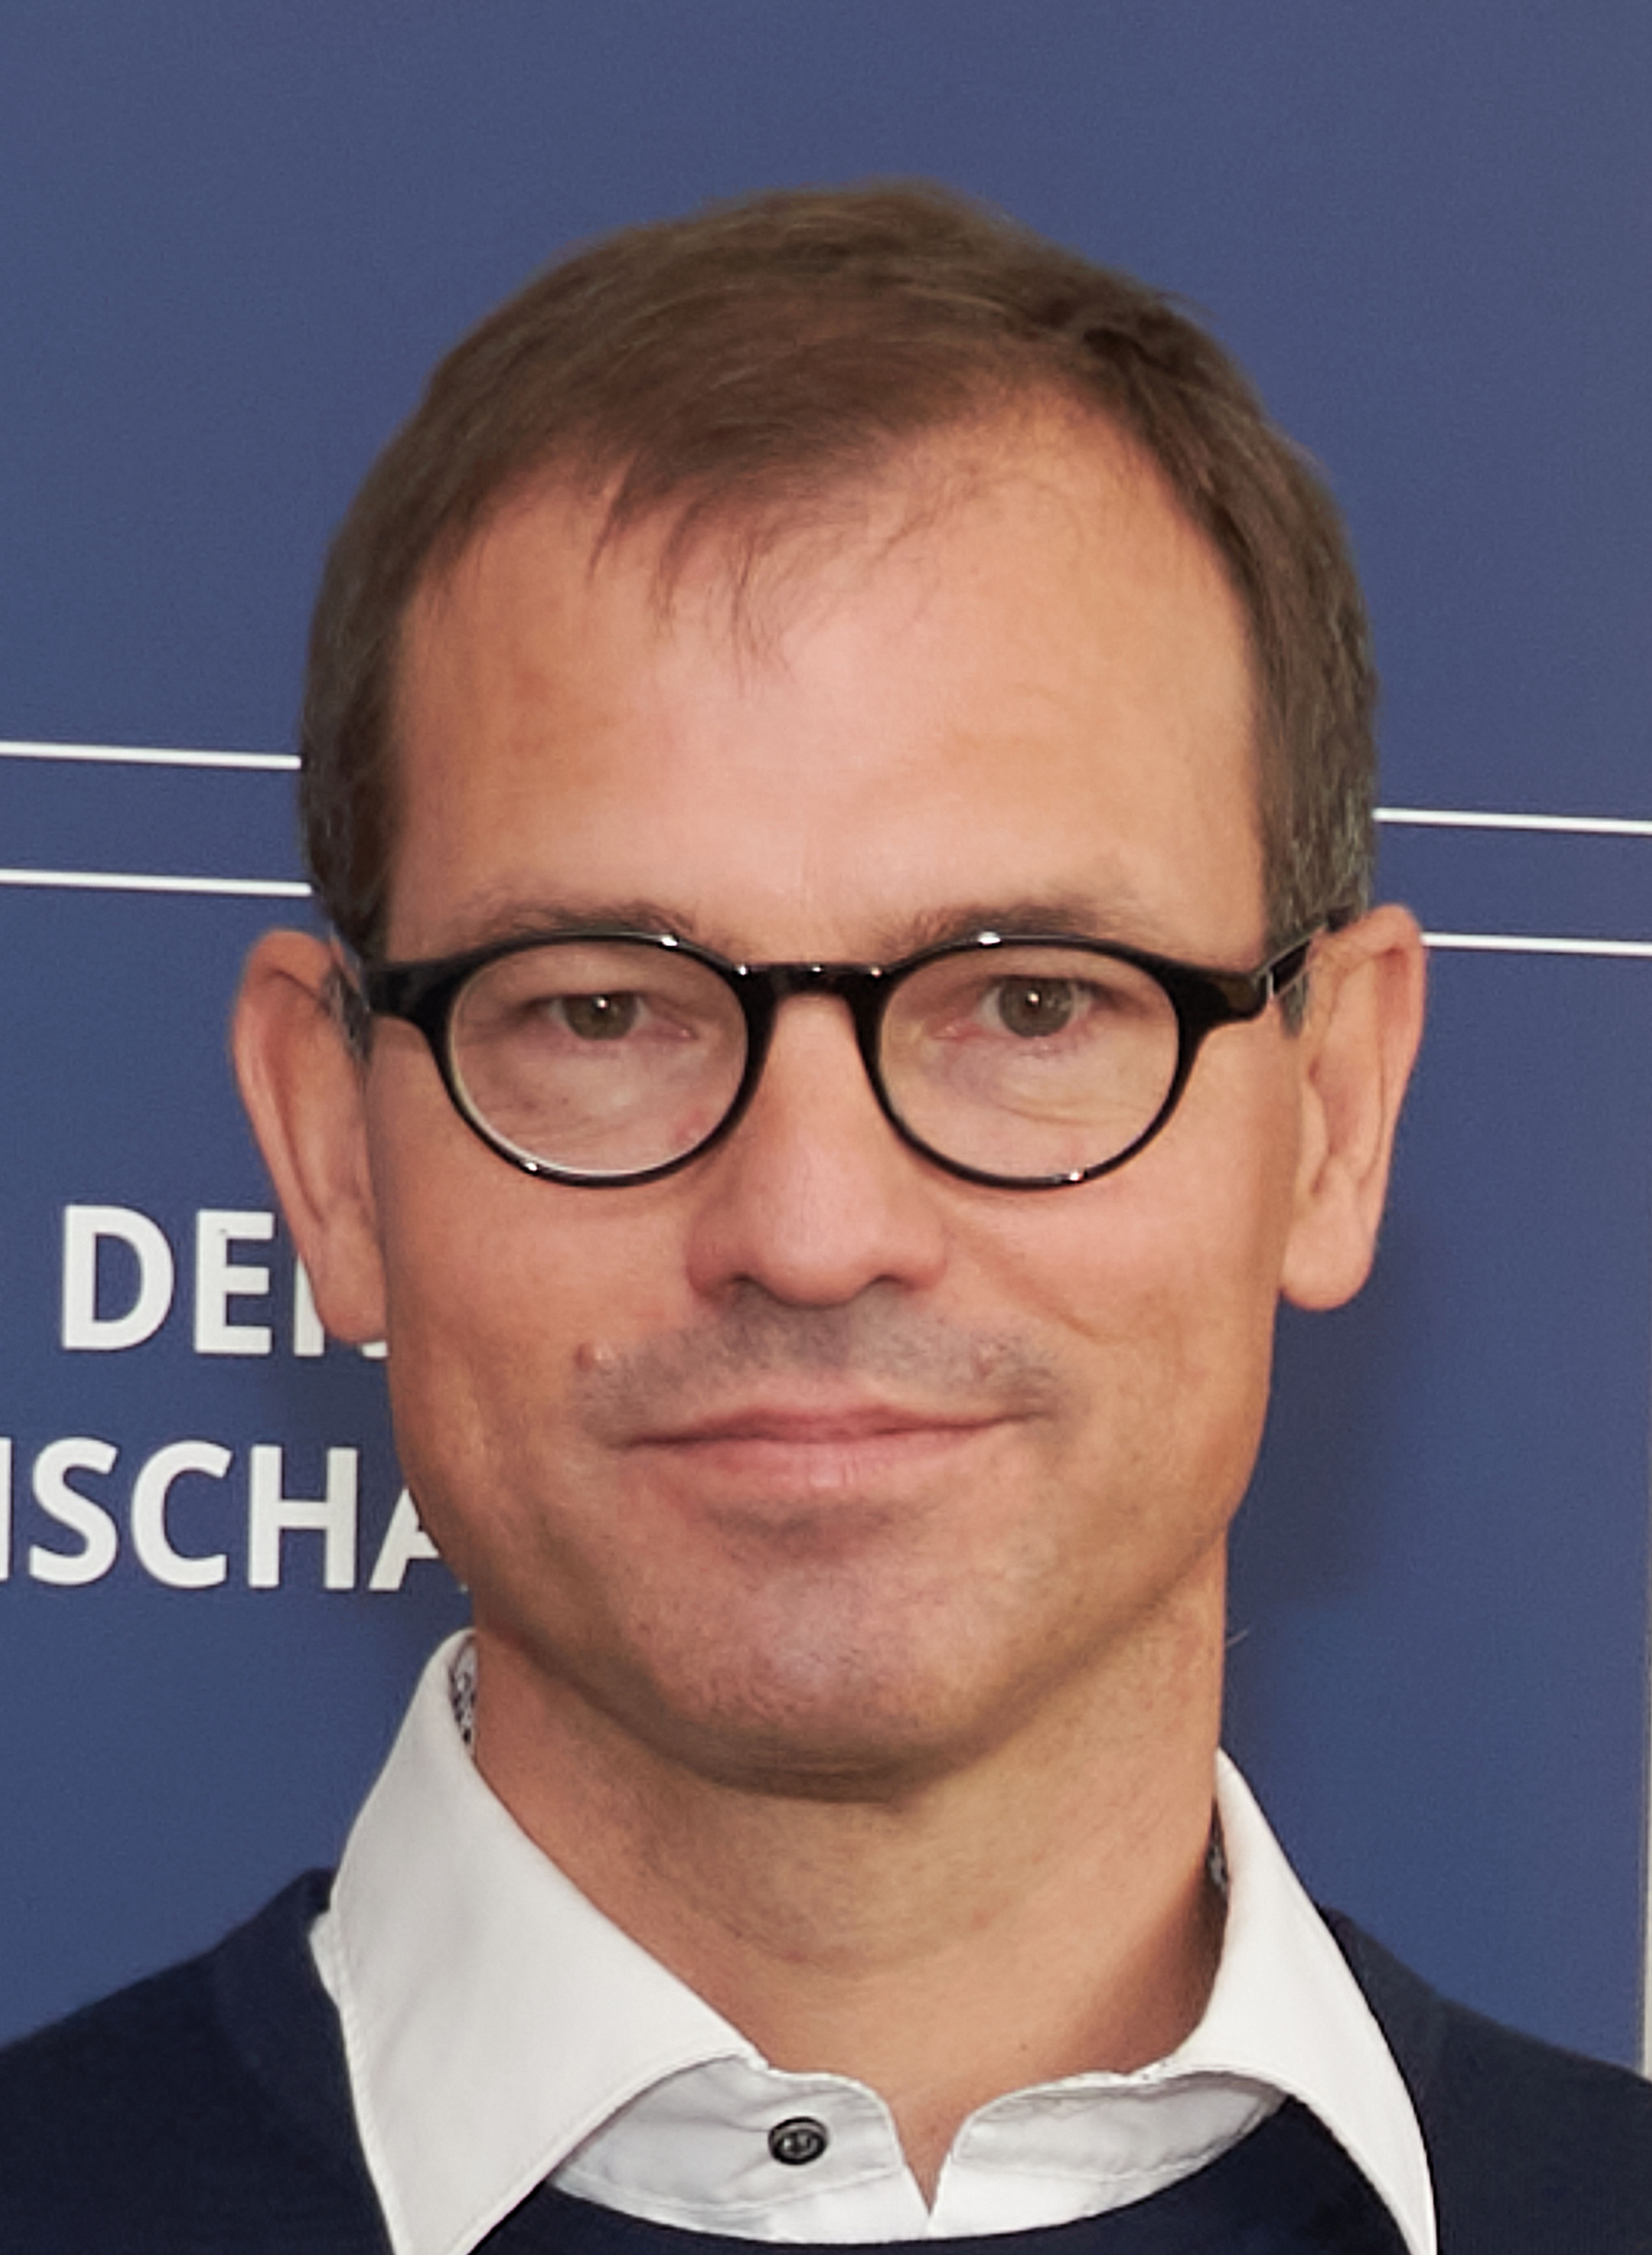 Portrait of a man with glasses and short brown hair